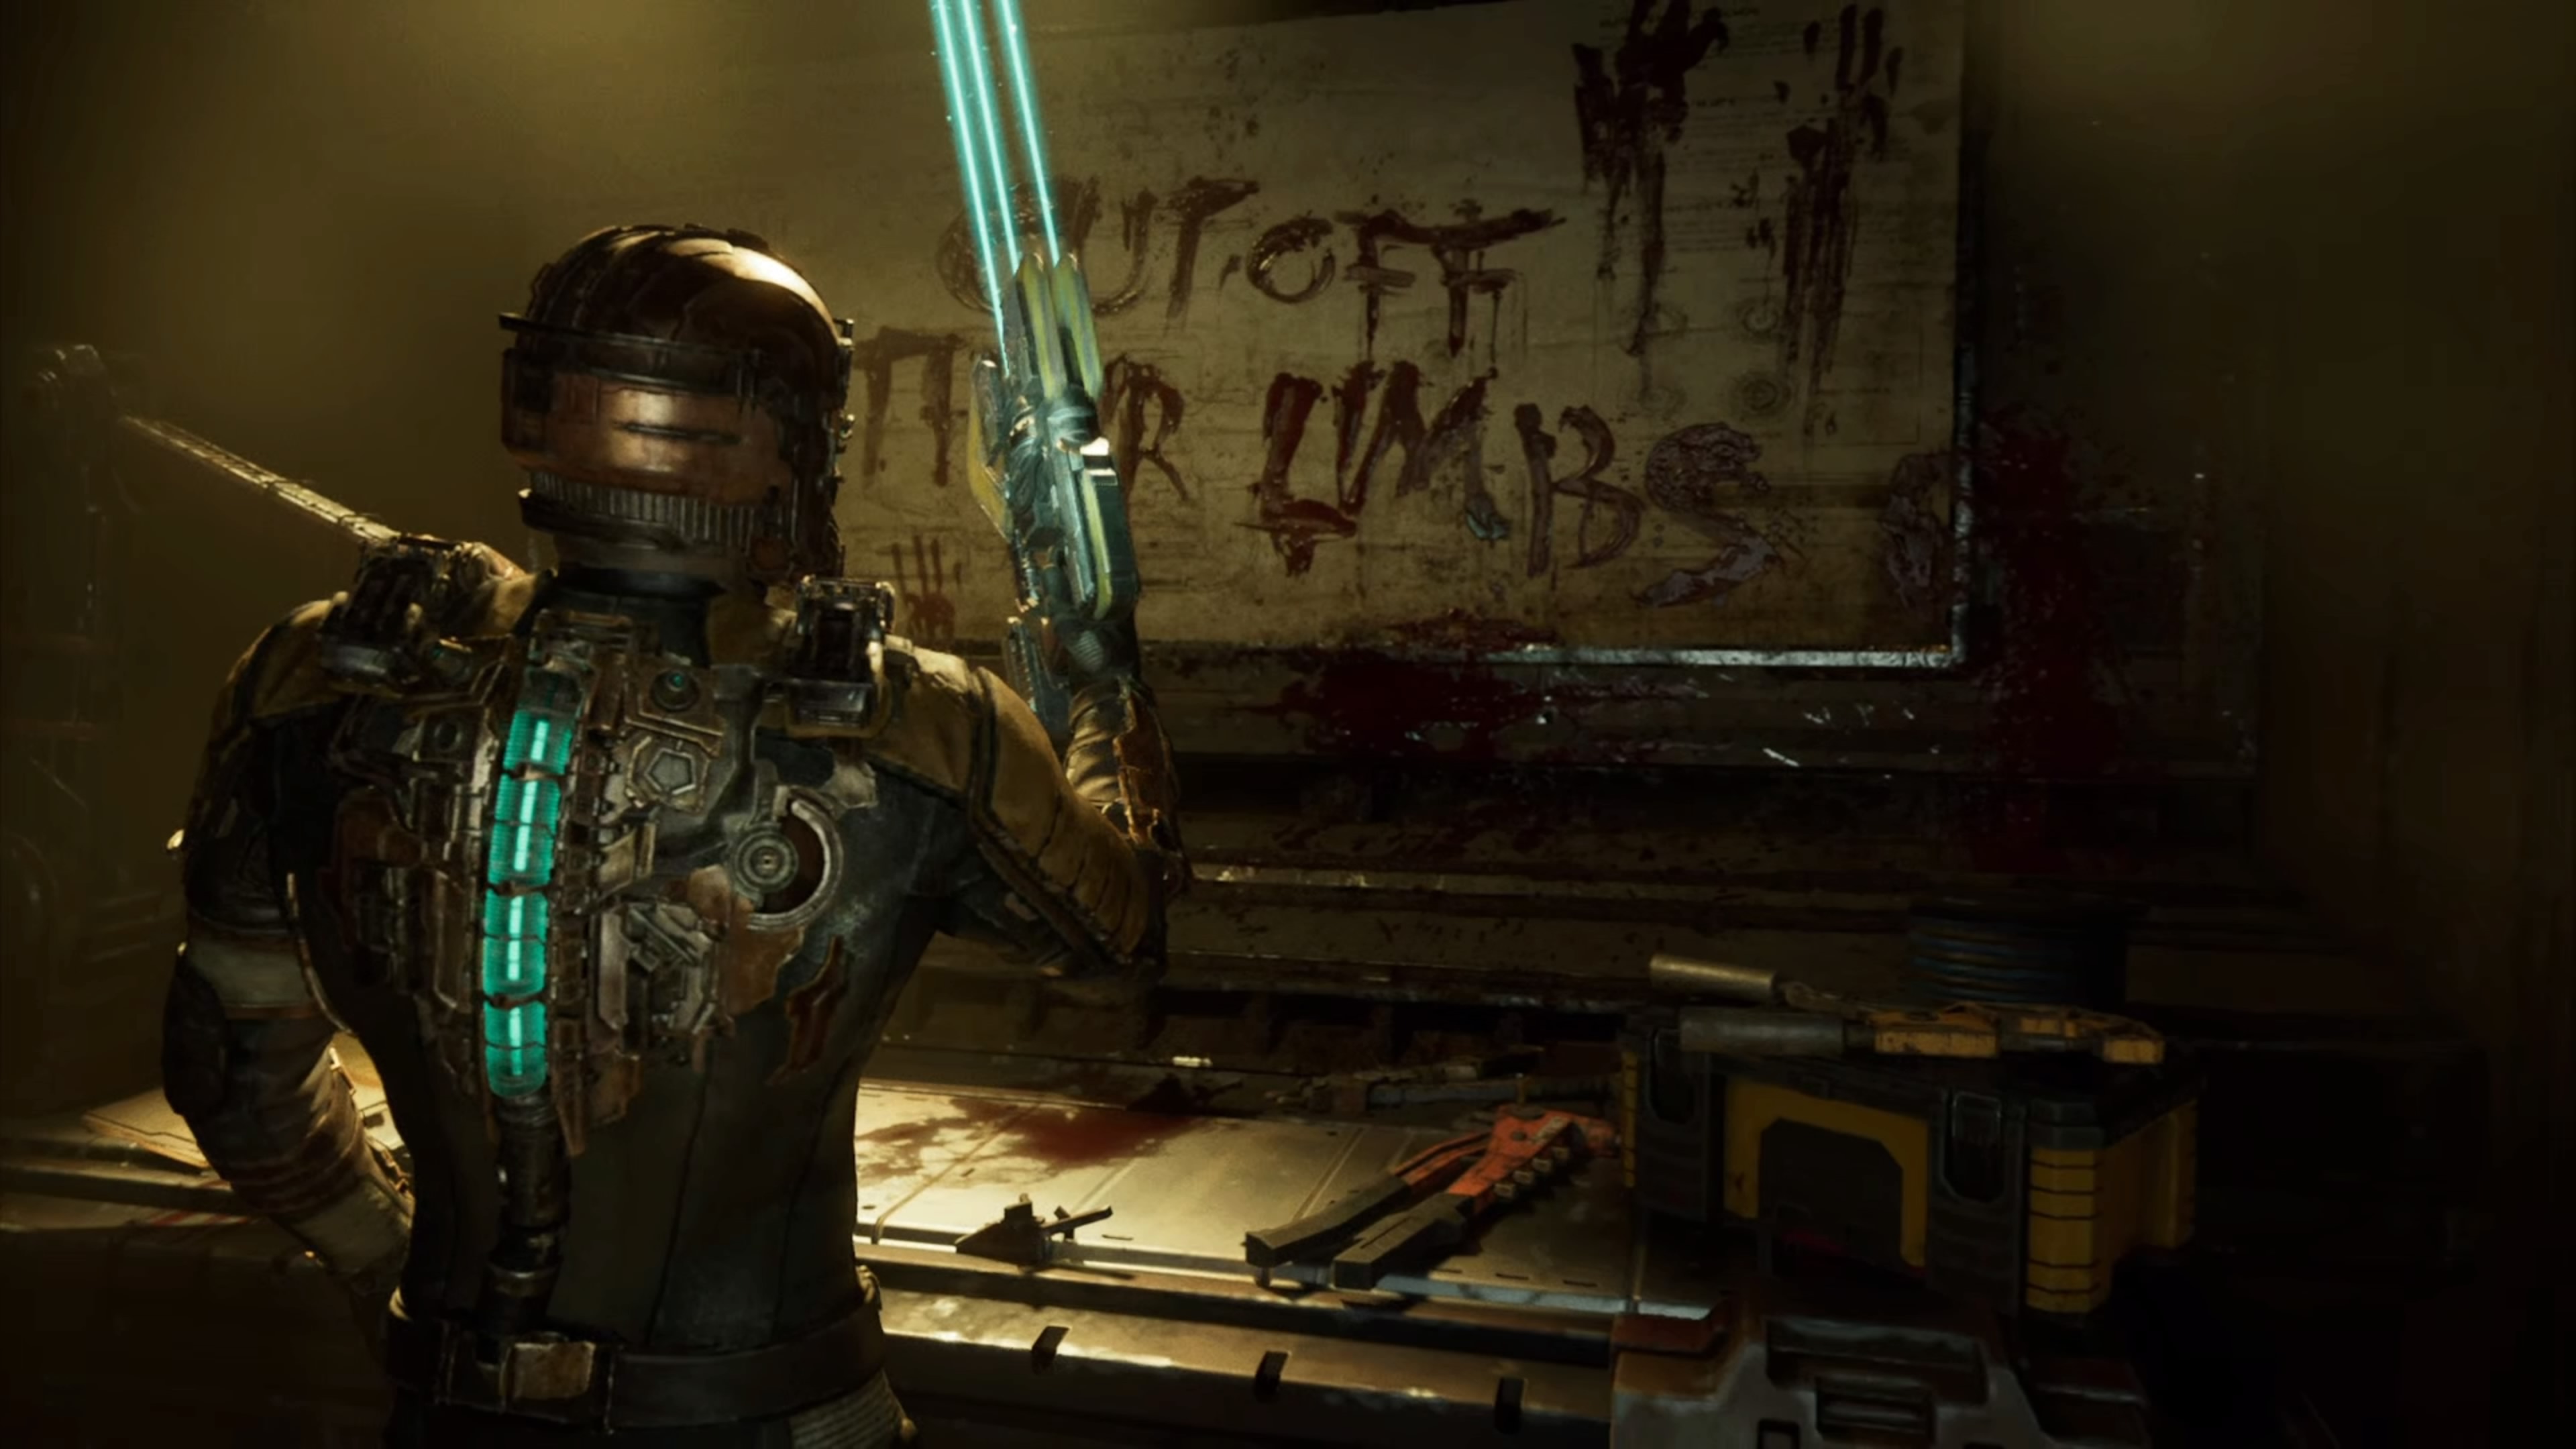 Dead Space review: A sublime mix of fresh, familiar, and freaking